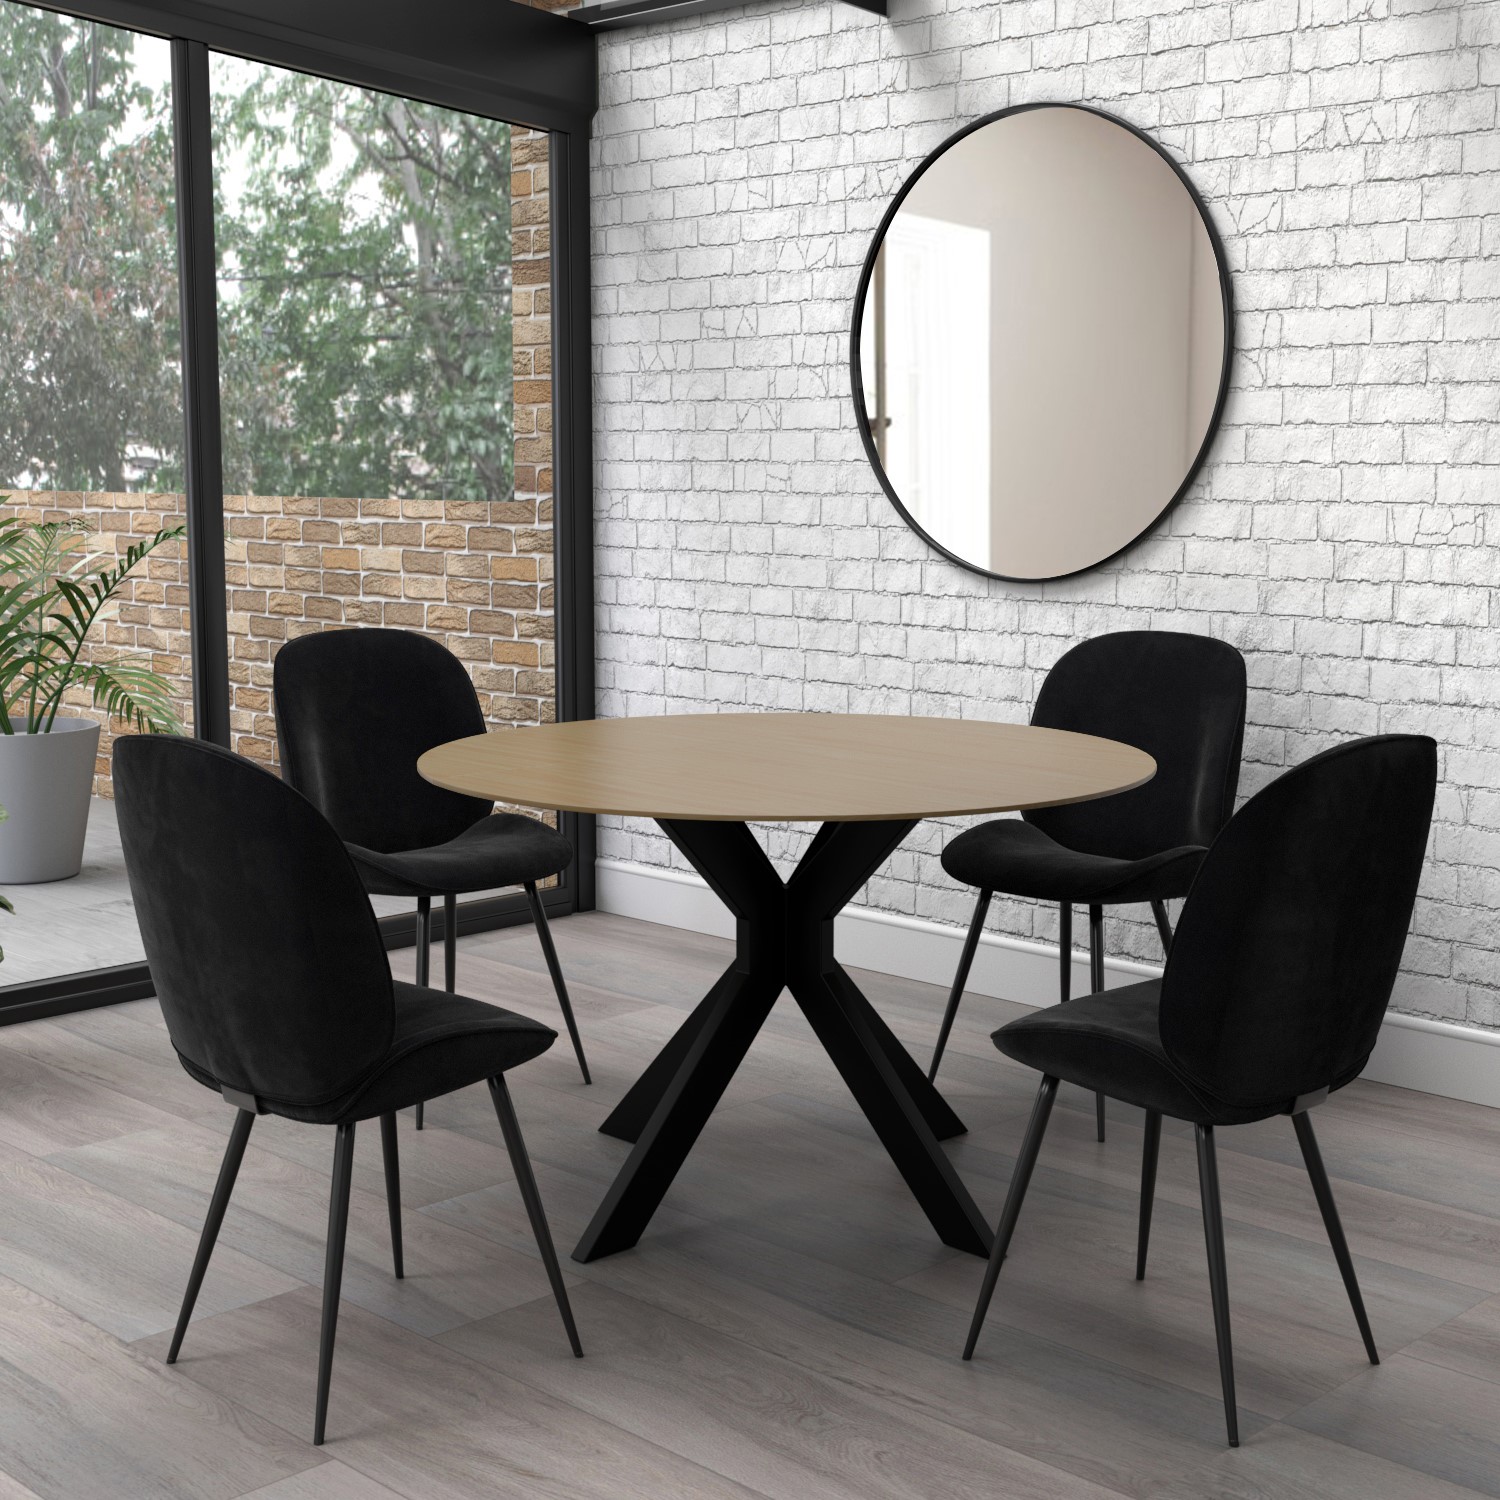 Photo of Round light oak drop leaf dining table with 4 black velvet dining chairs - carson